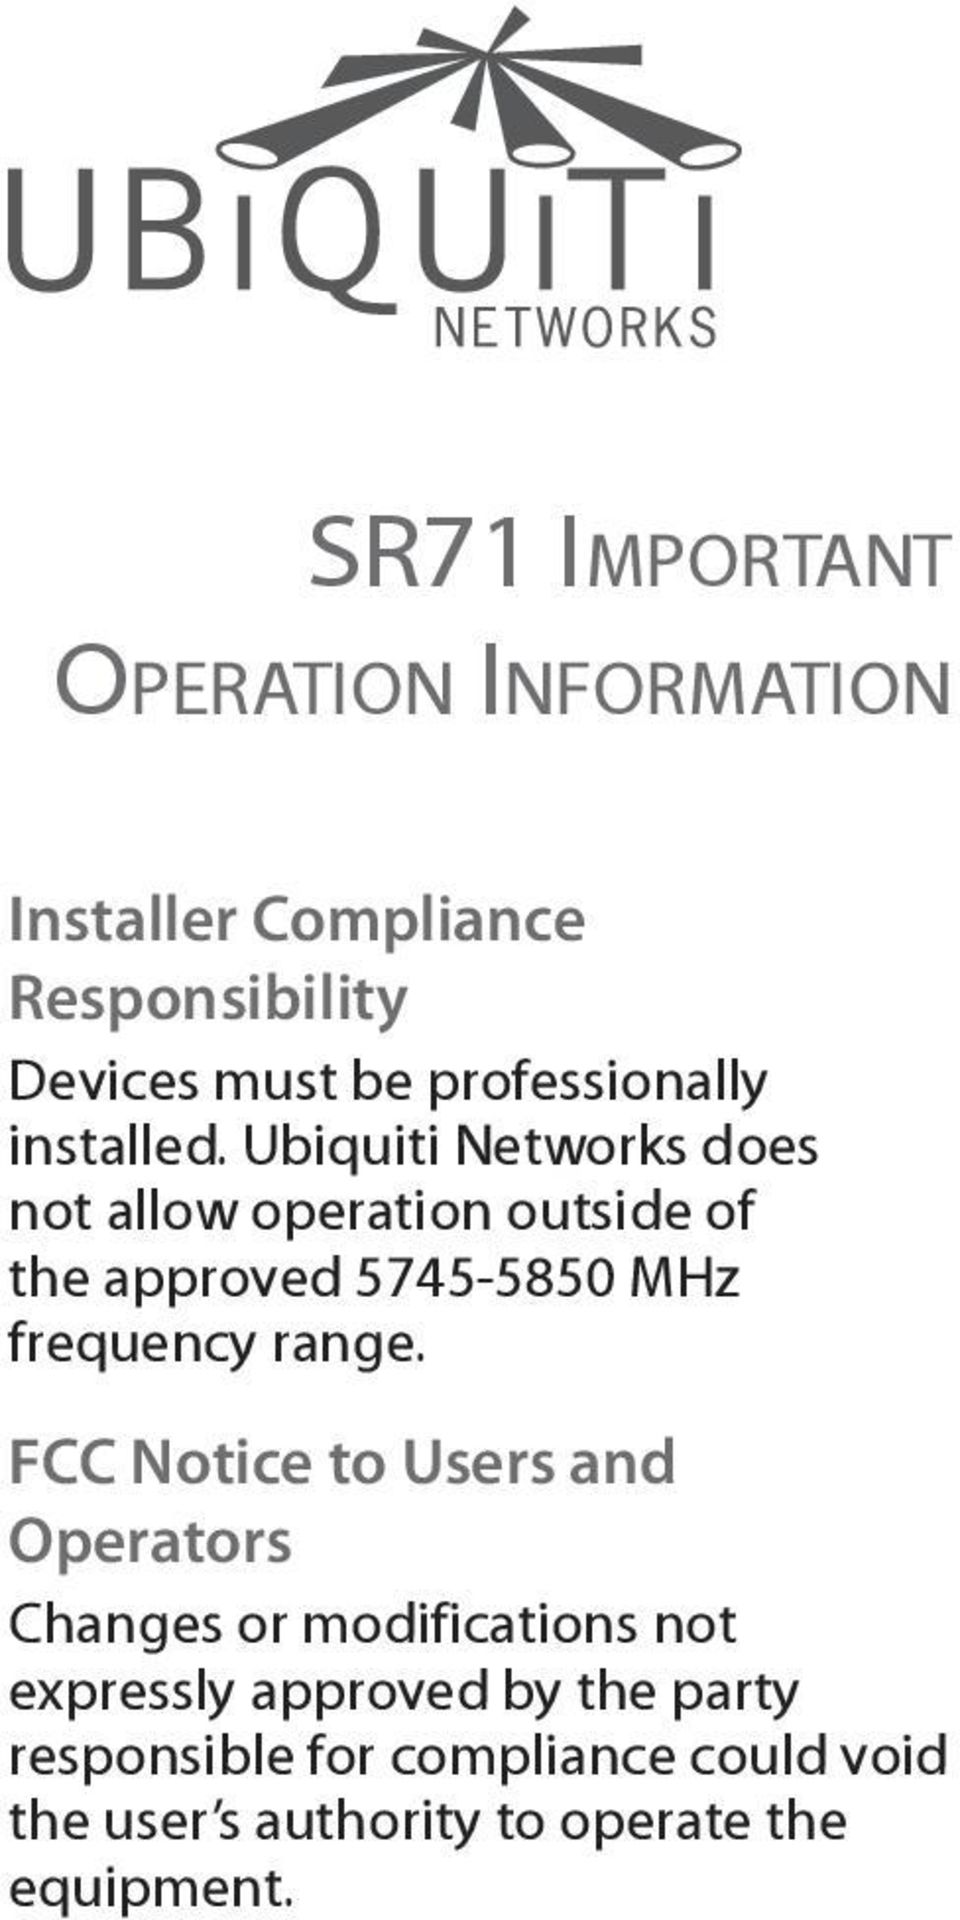 Ubiquiti Networks does not allow operation outside of the approved 5745-5850 MHz frequency range.